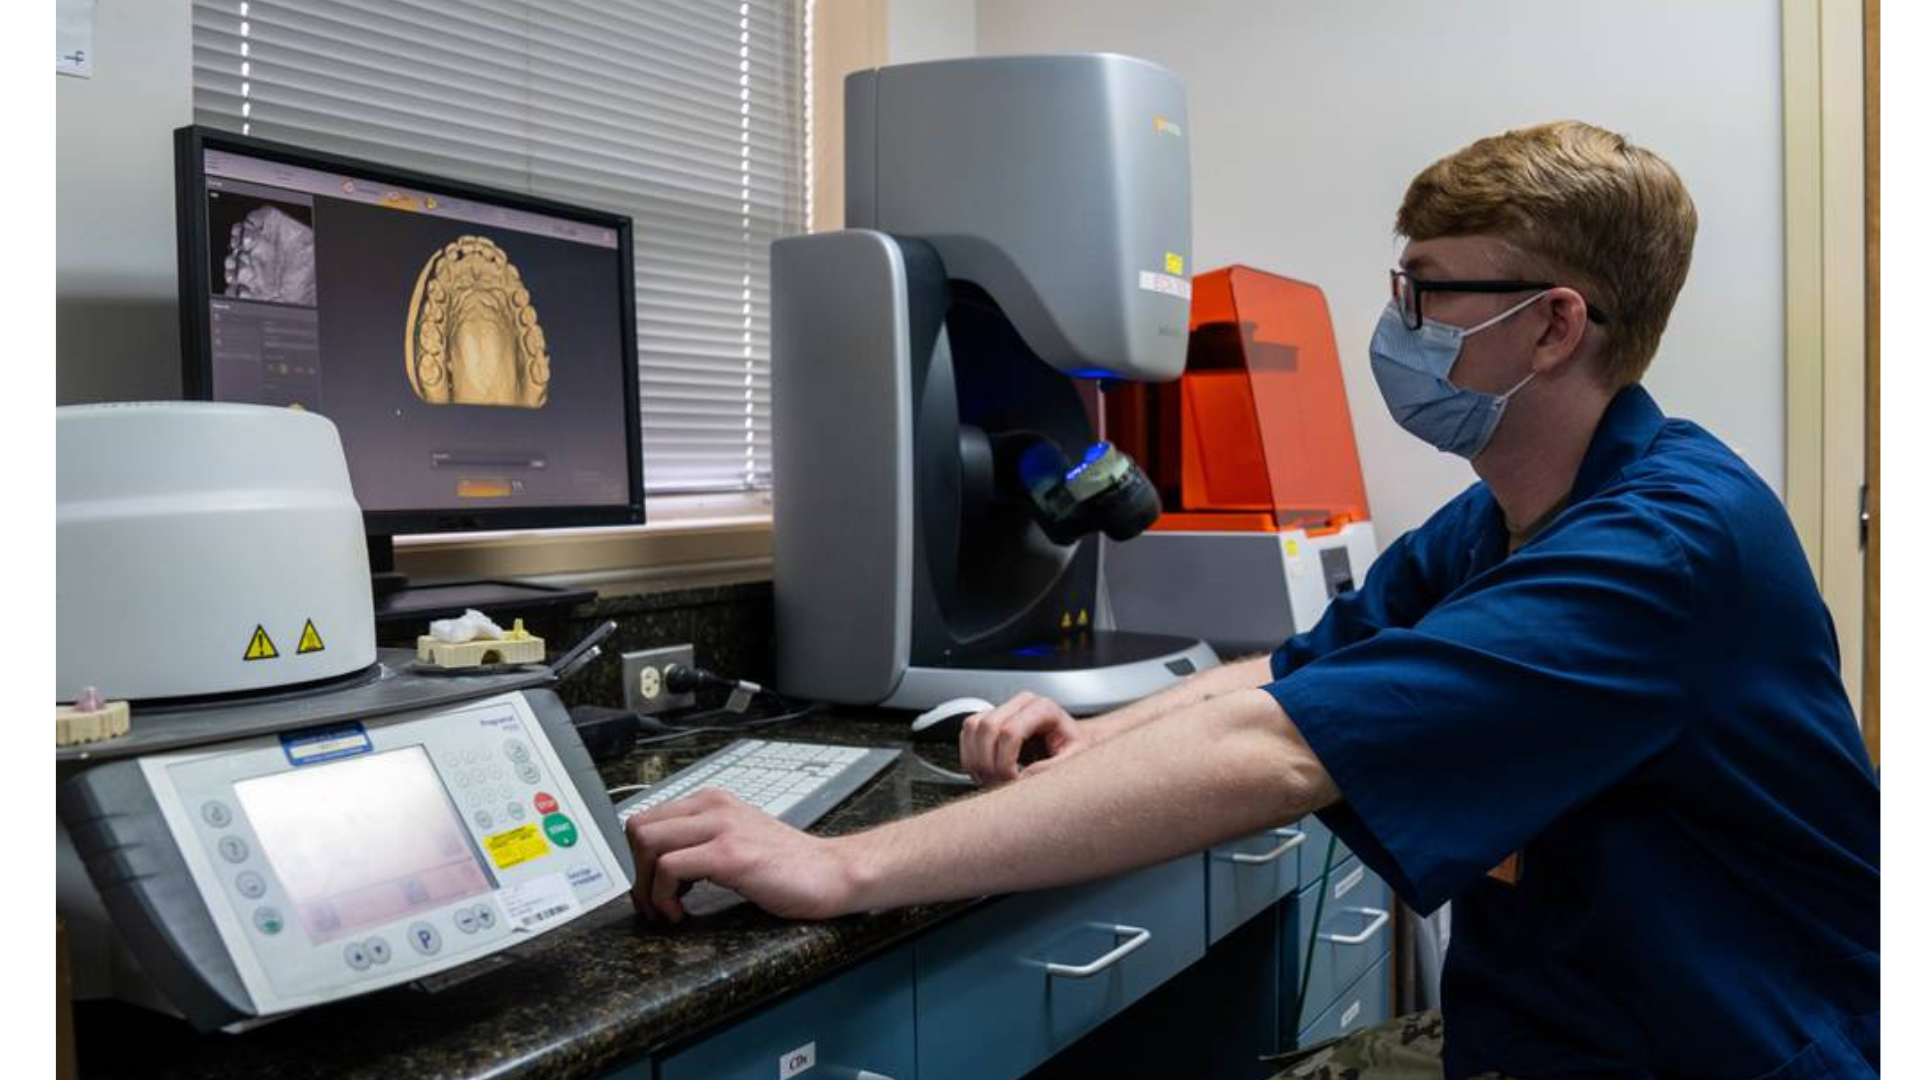 The Department of Veterans Affairs has gotten its first 3D printing medical device cleared to assist in veterans’ surgeries, officials shared this week.